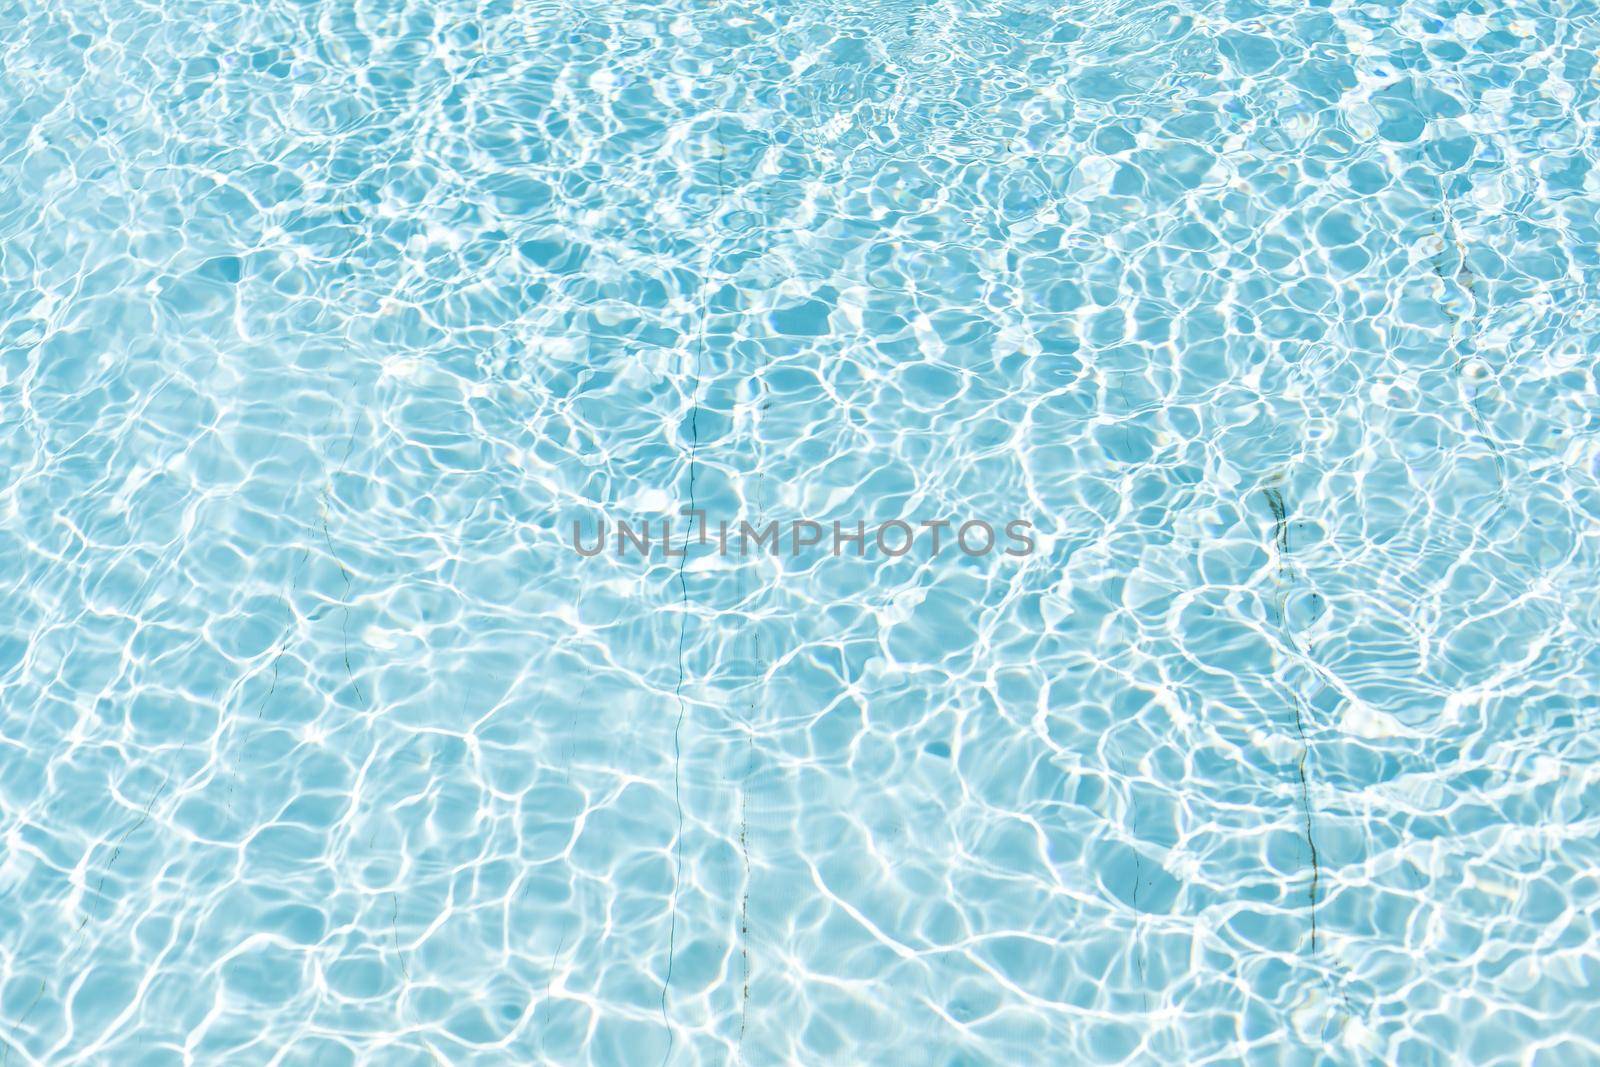 surface of blue swimming pool, background of water in swimming pool